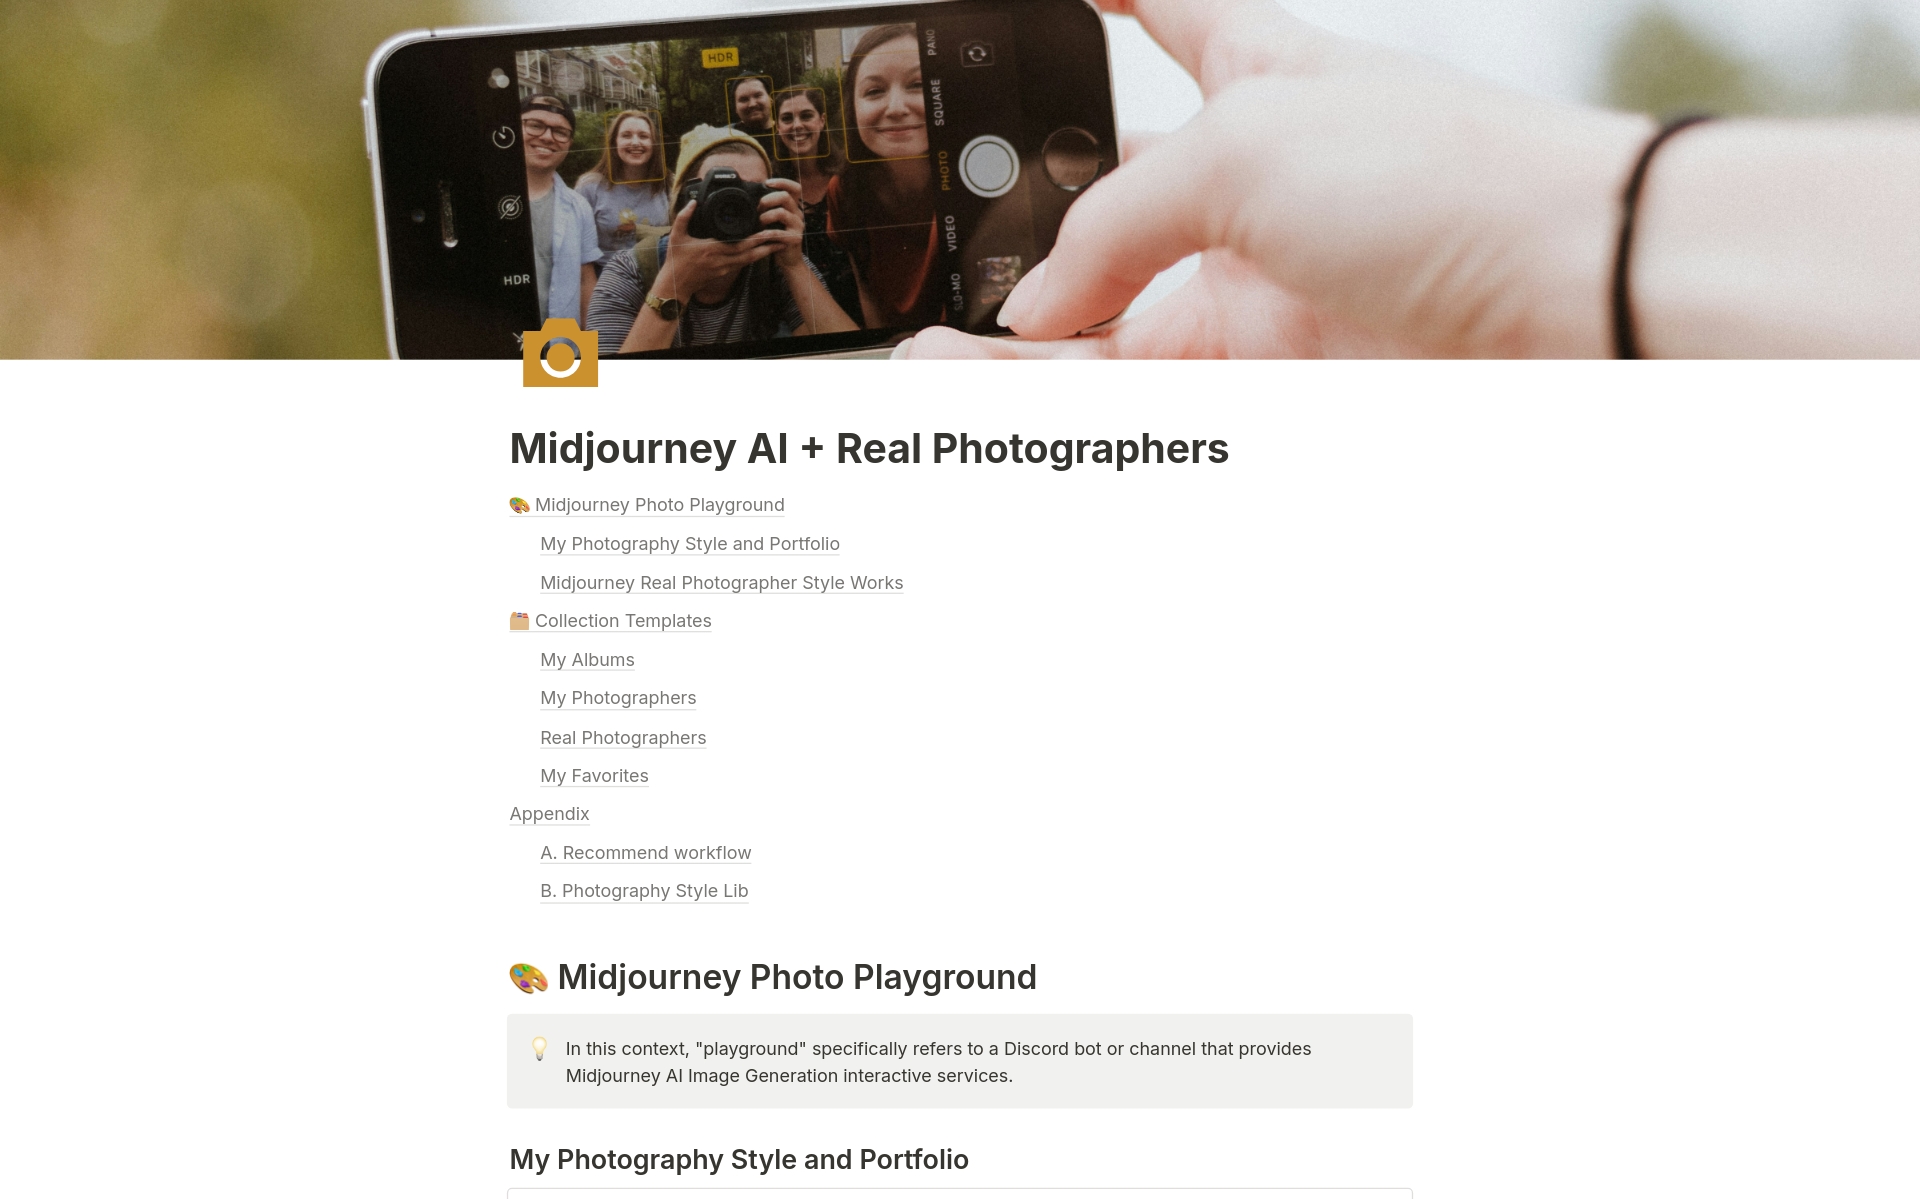 Tired of searching for the perfect photo? Midjourney AI + Real Photographers empowers you to create stunning, personalized images using the magic of Midjourney AI.